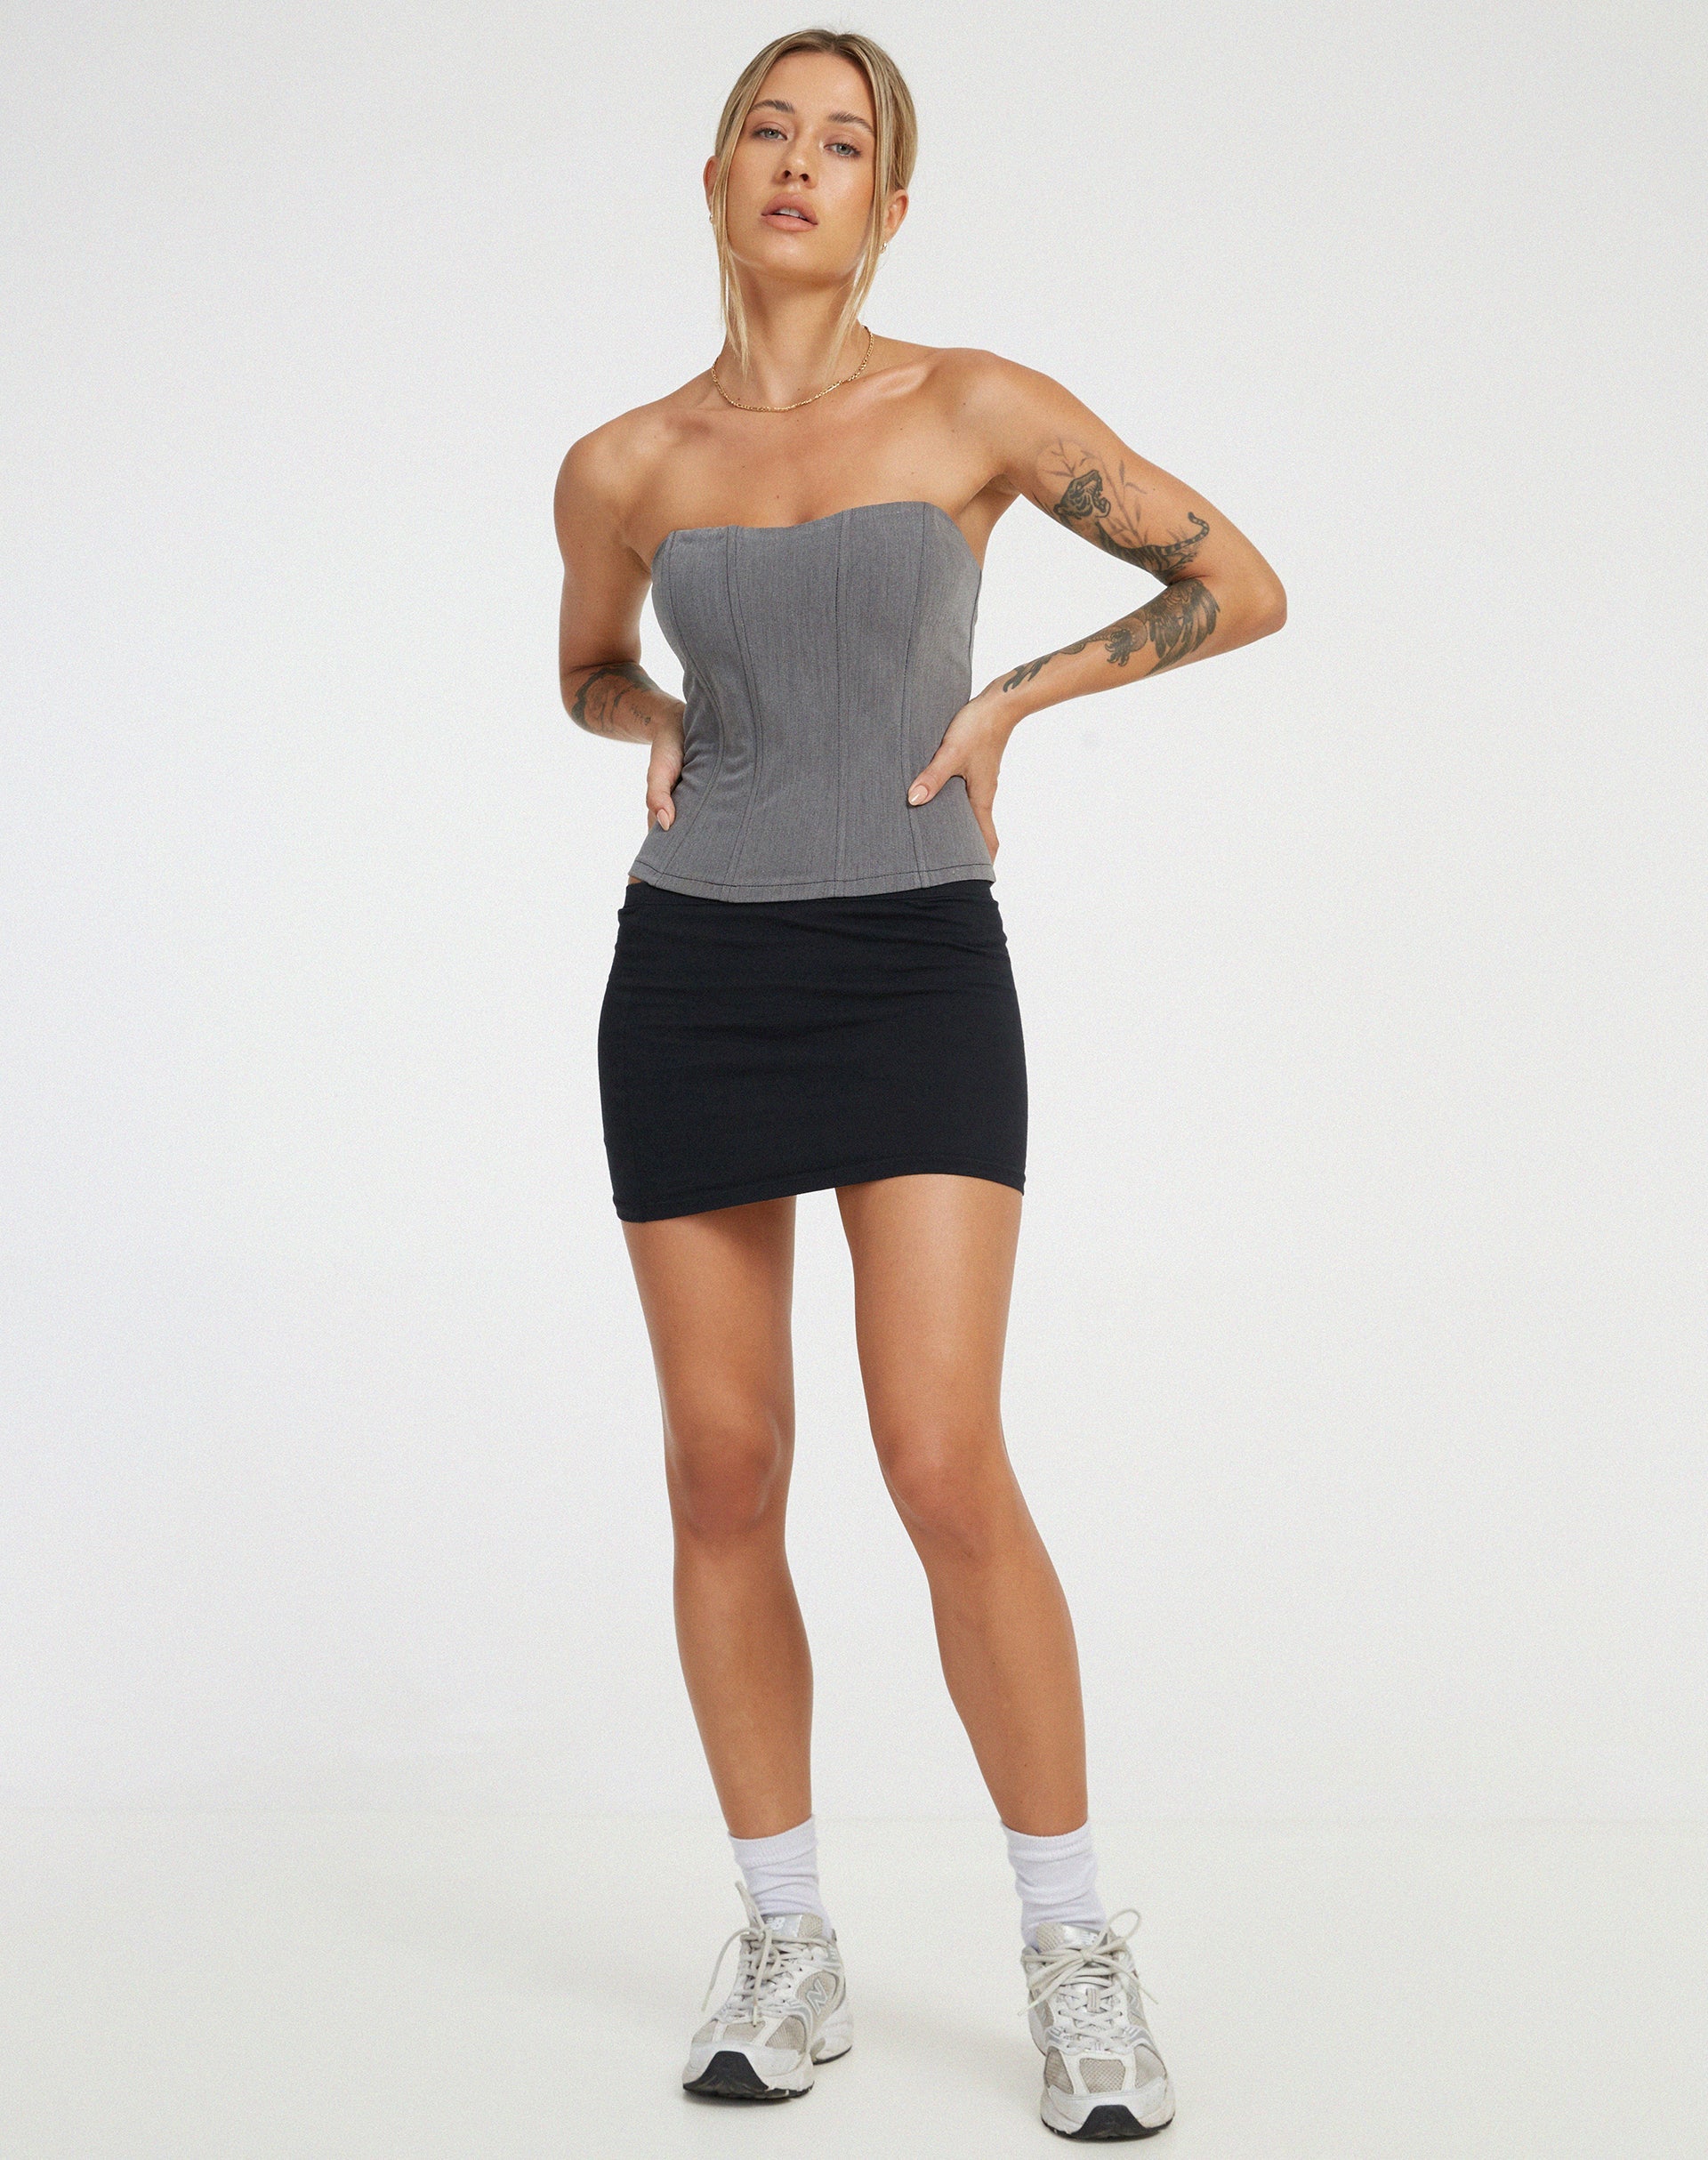 image of Kansa Corset Top in Charcoal